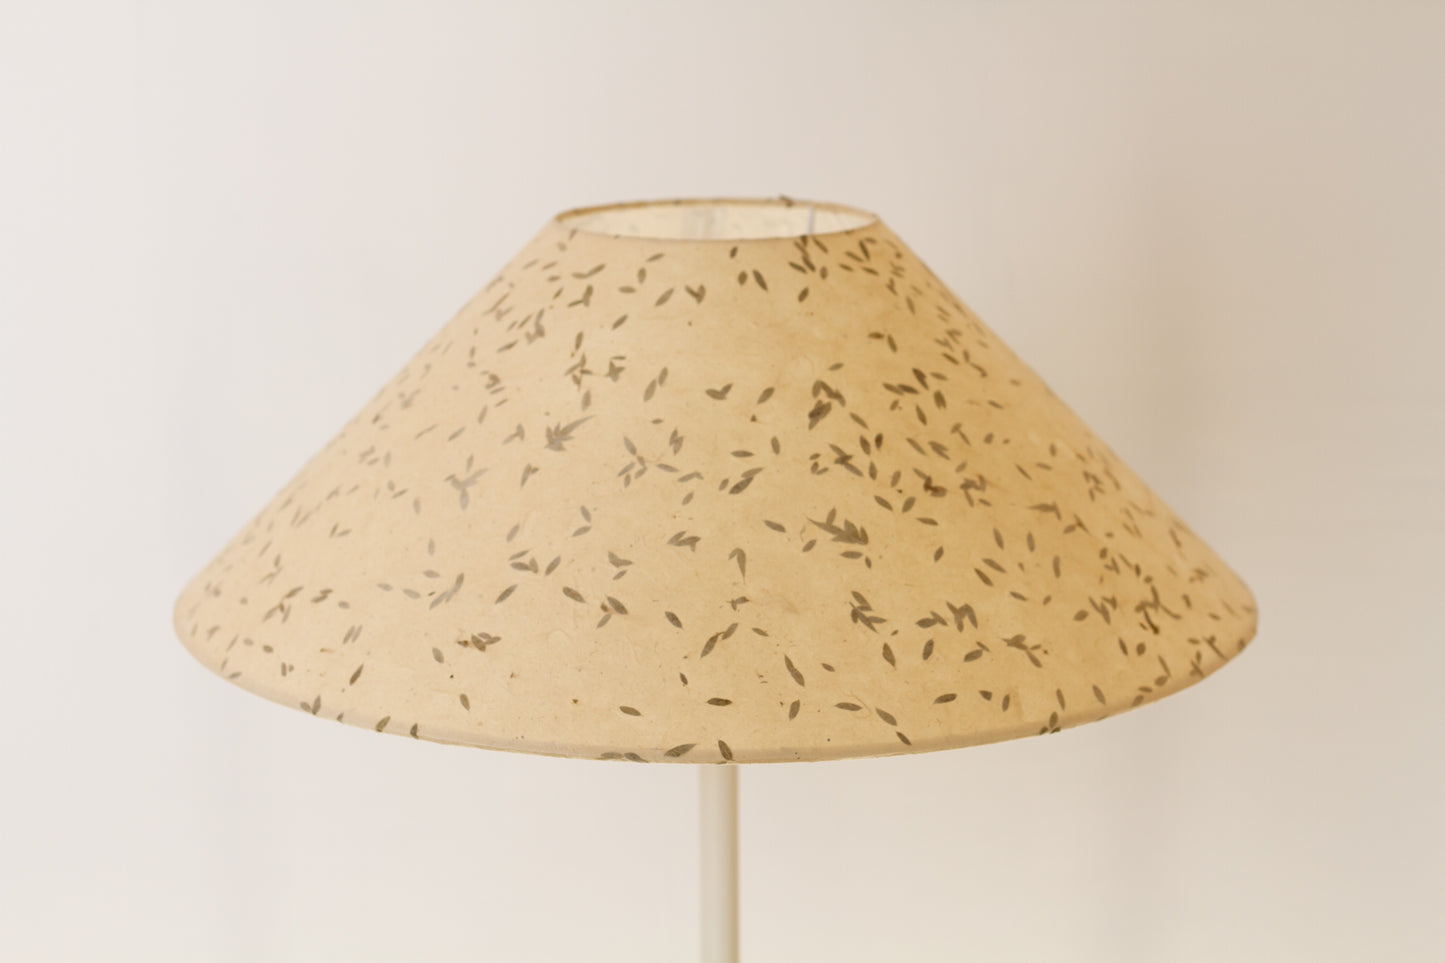 Conical Lamp Shade ~ 15cm(top) x 50cm(bottom) x 18cm(height) ~ P95 Little Leaves